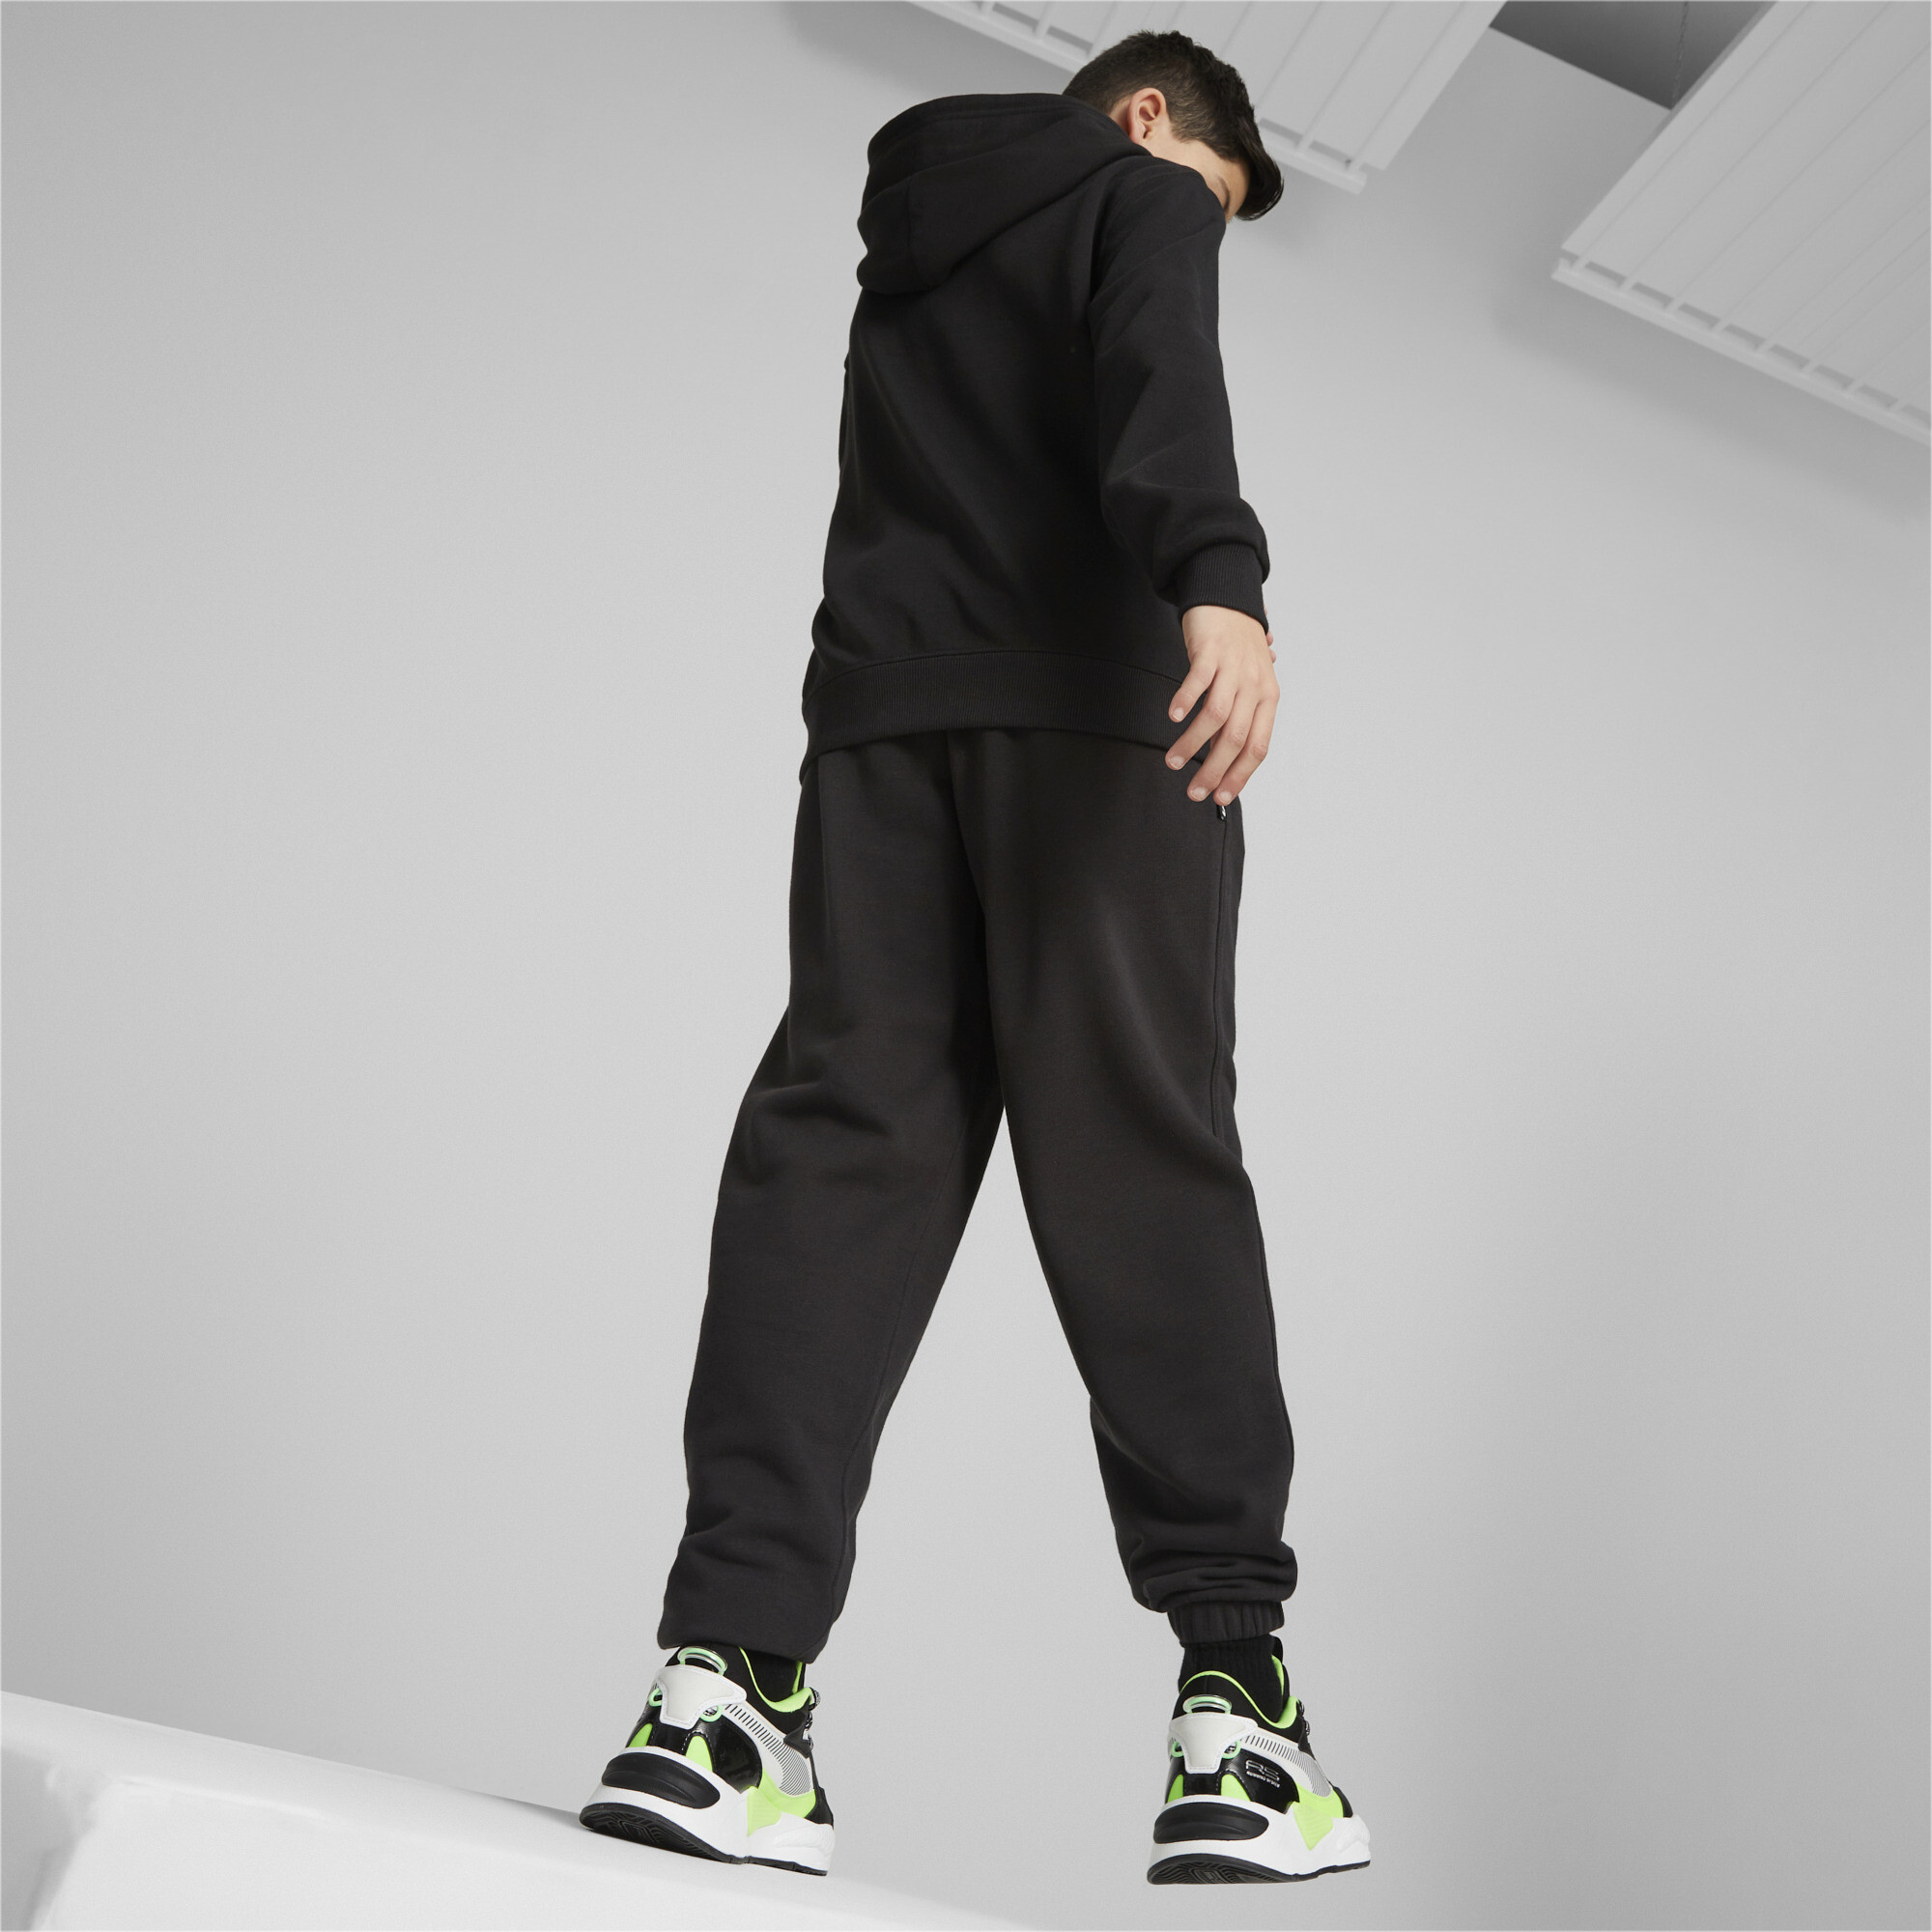 PUMA Downtown Sweatpants In Black, Size 9-10 Youth